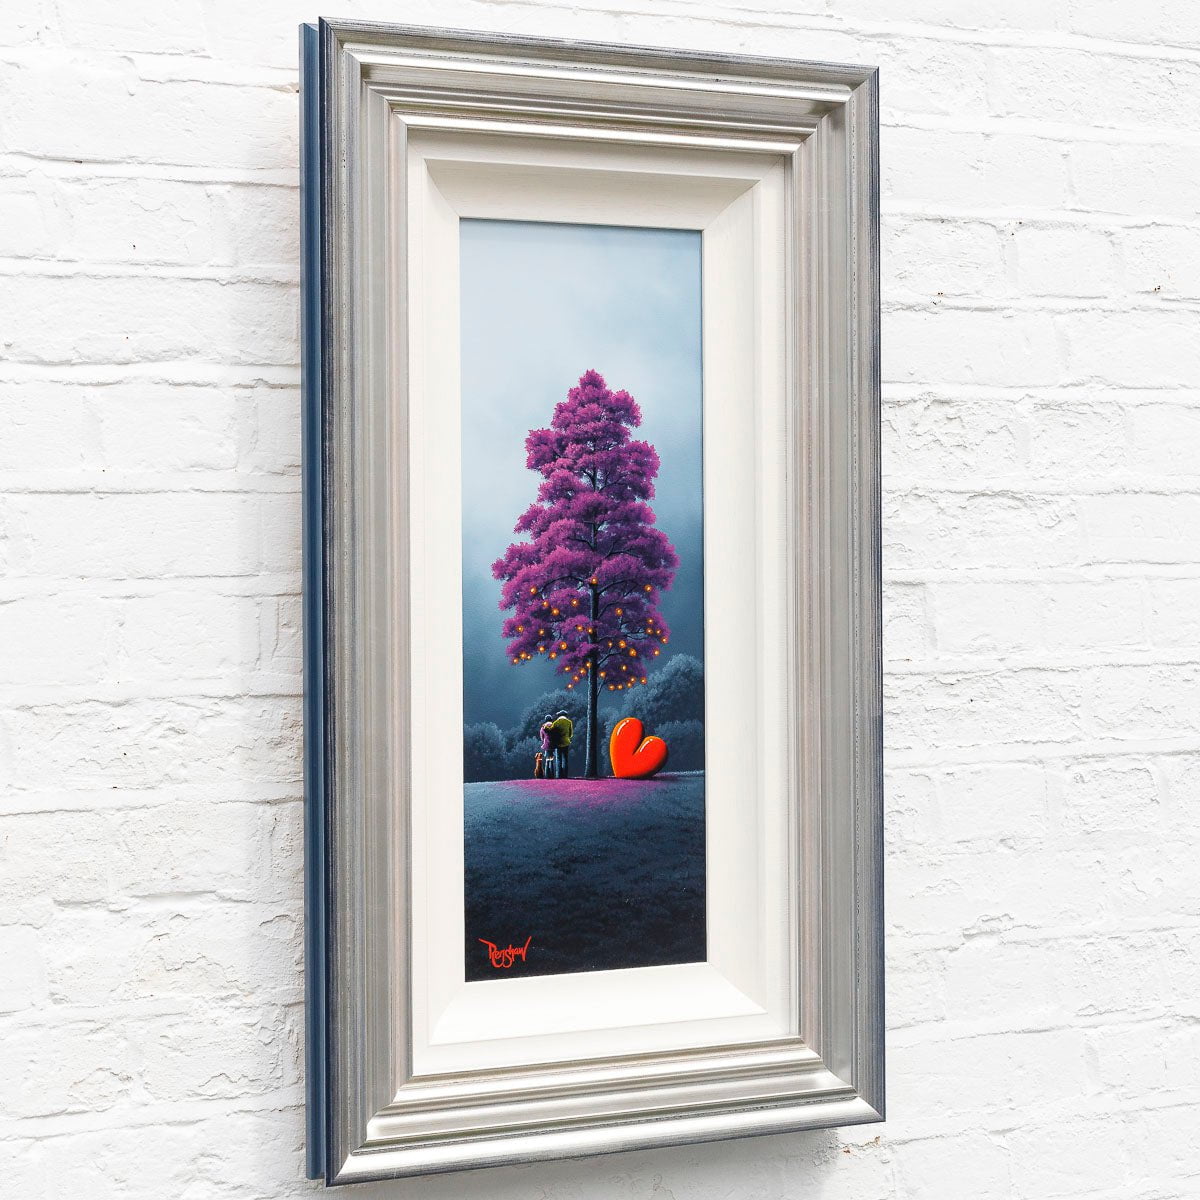 You Bring Colour To My World &amp; You Bring Colour To My Life - Matching Original SET David Renshaw Matching Original SET